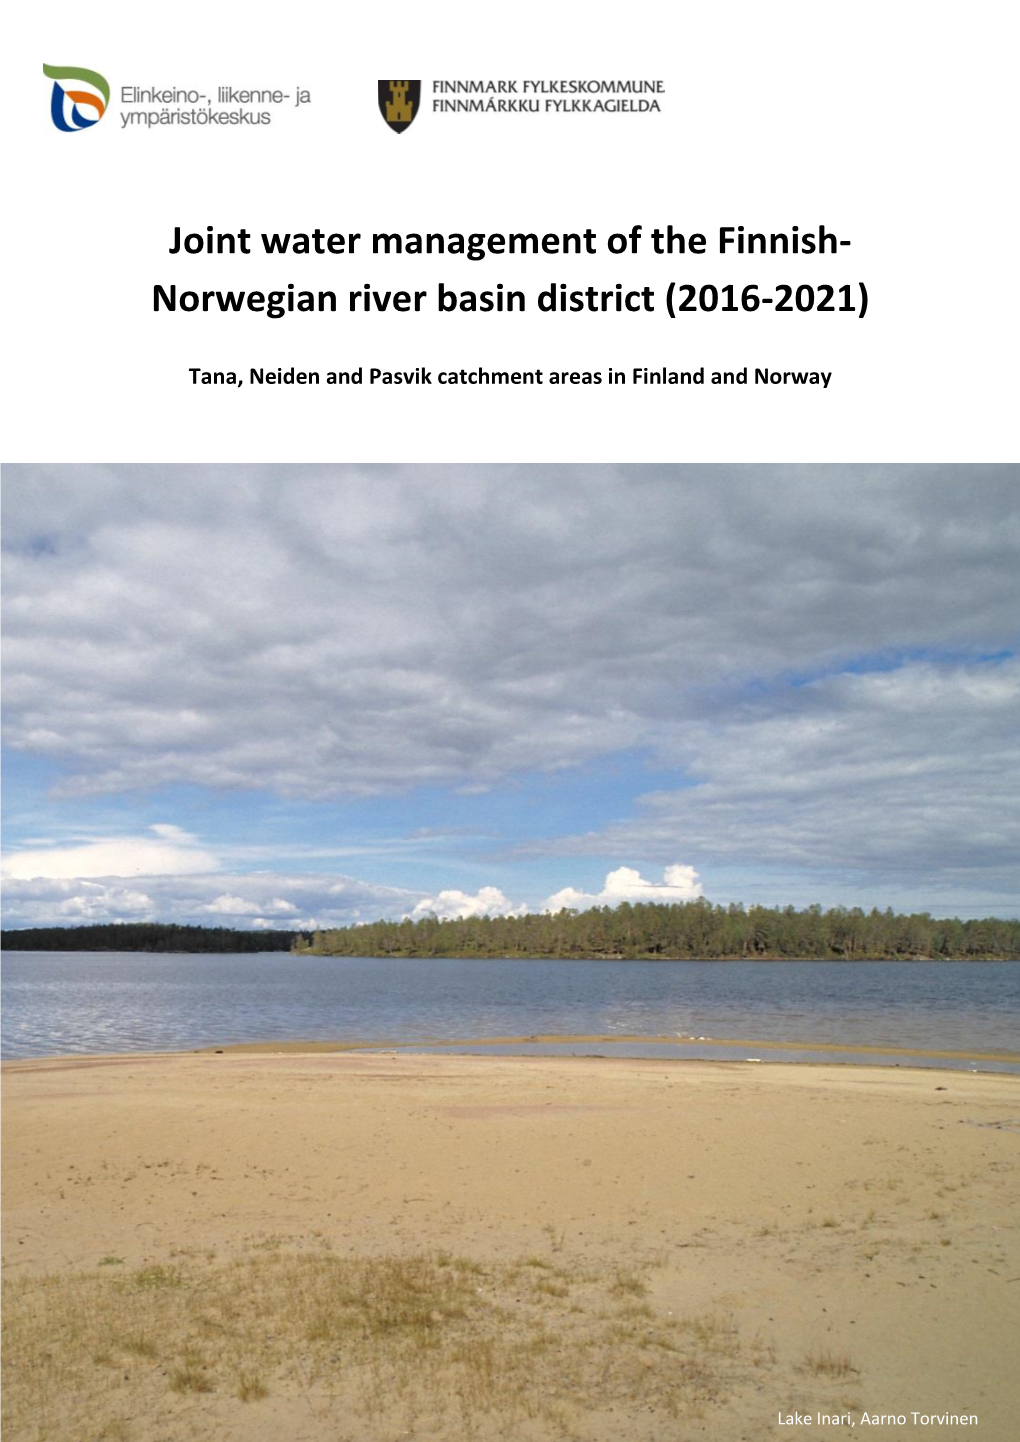 Joint Water Management of the Finnish- Norwegian River Basin District (2016-2021)